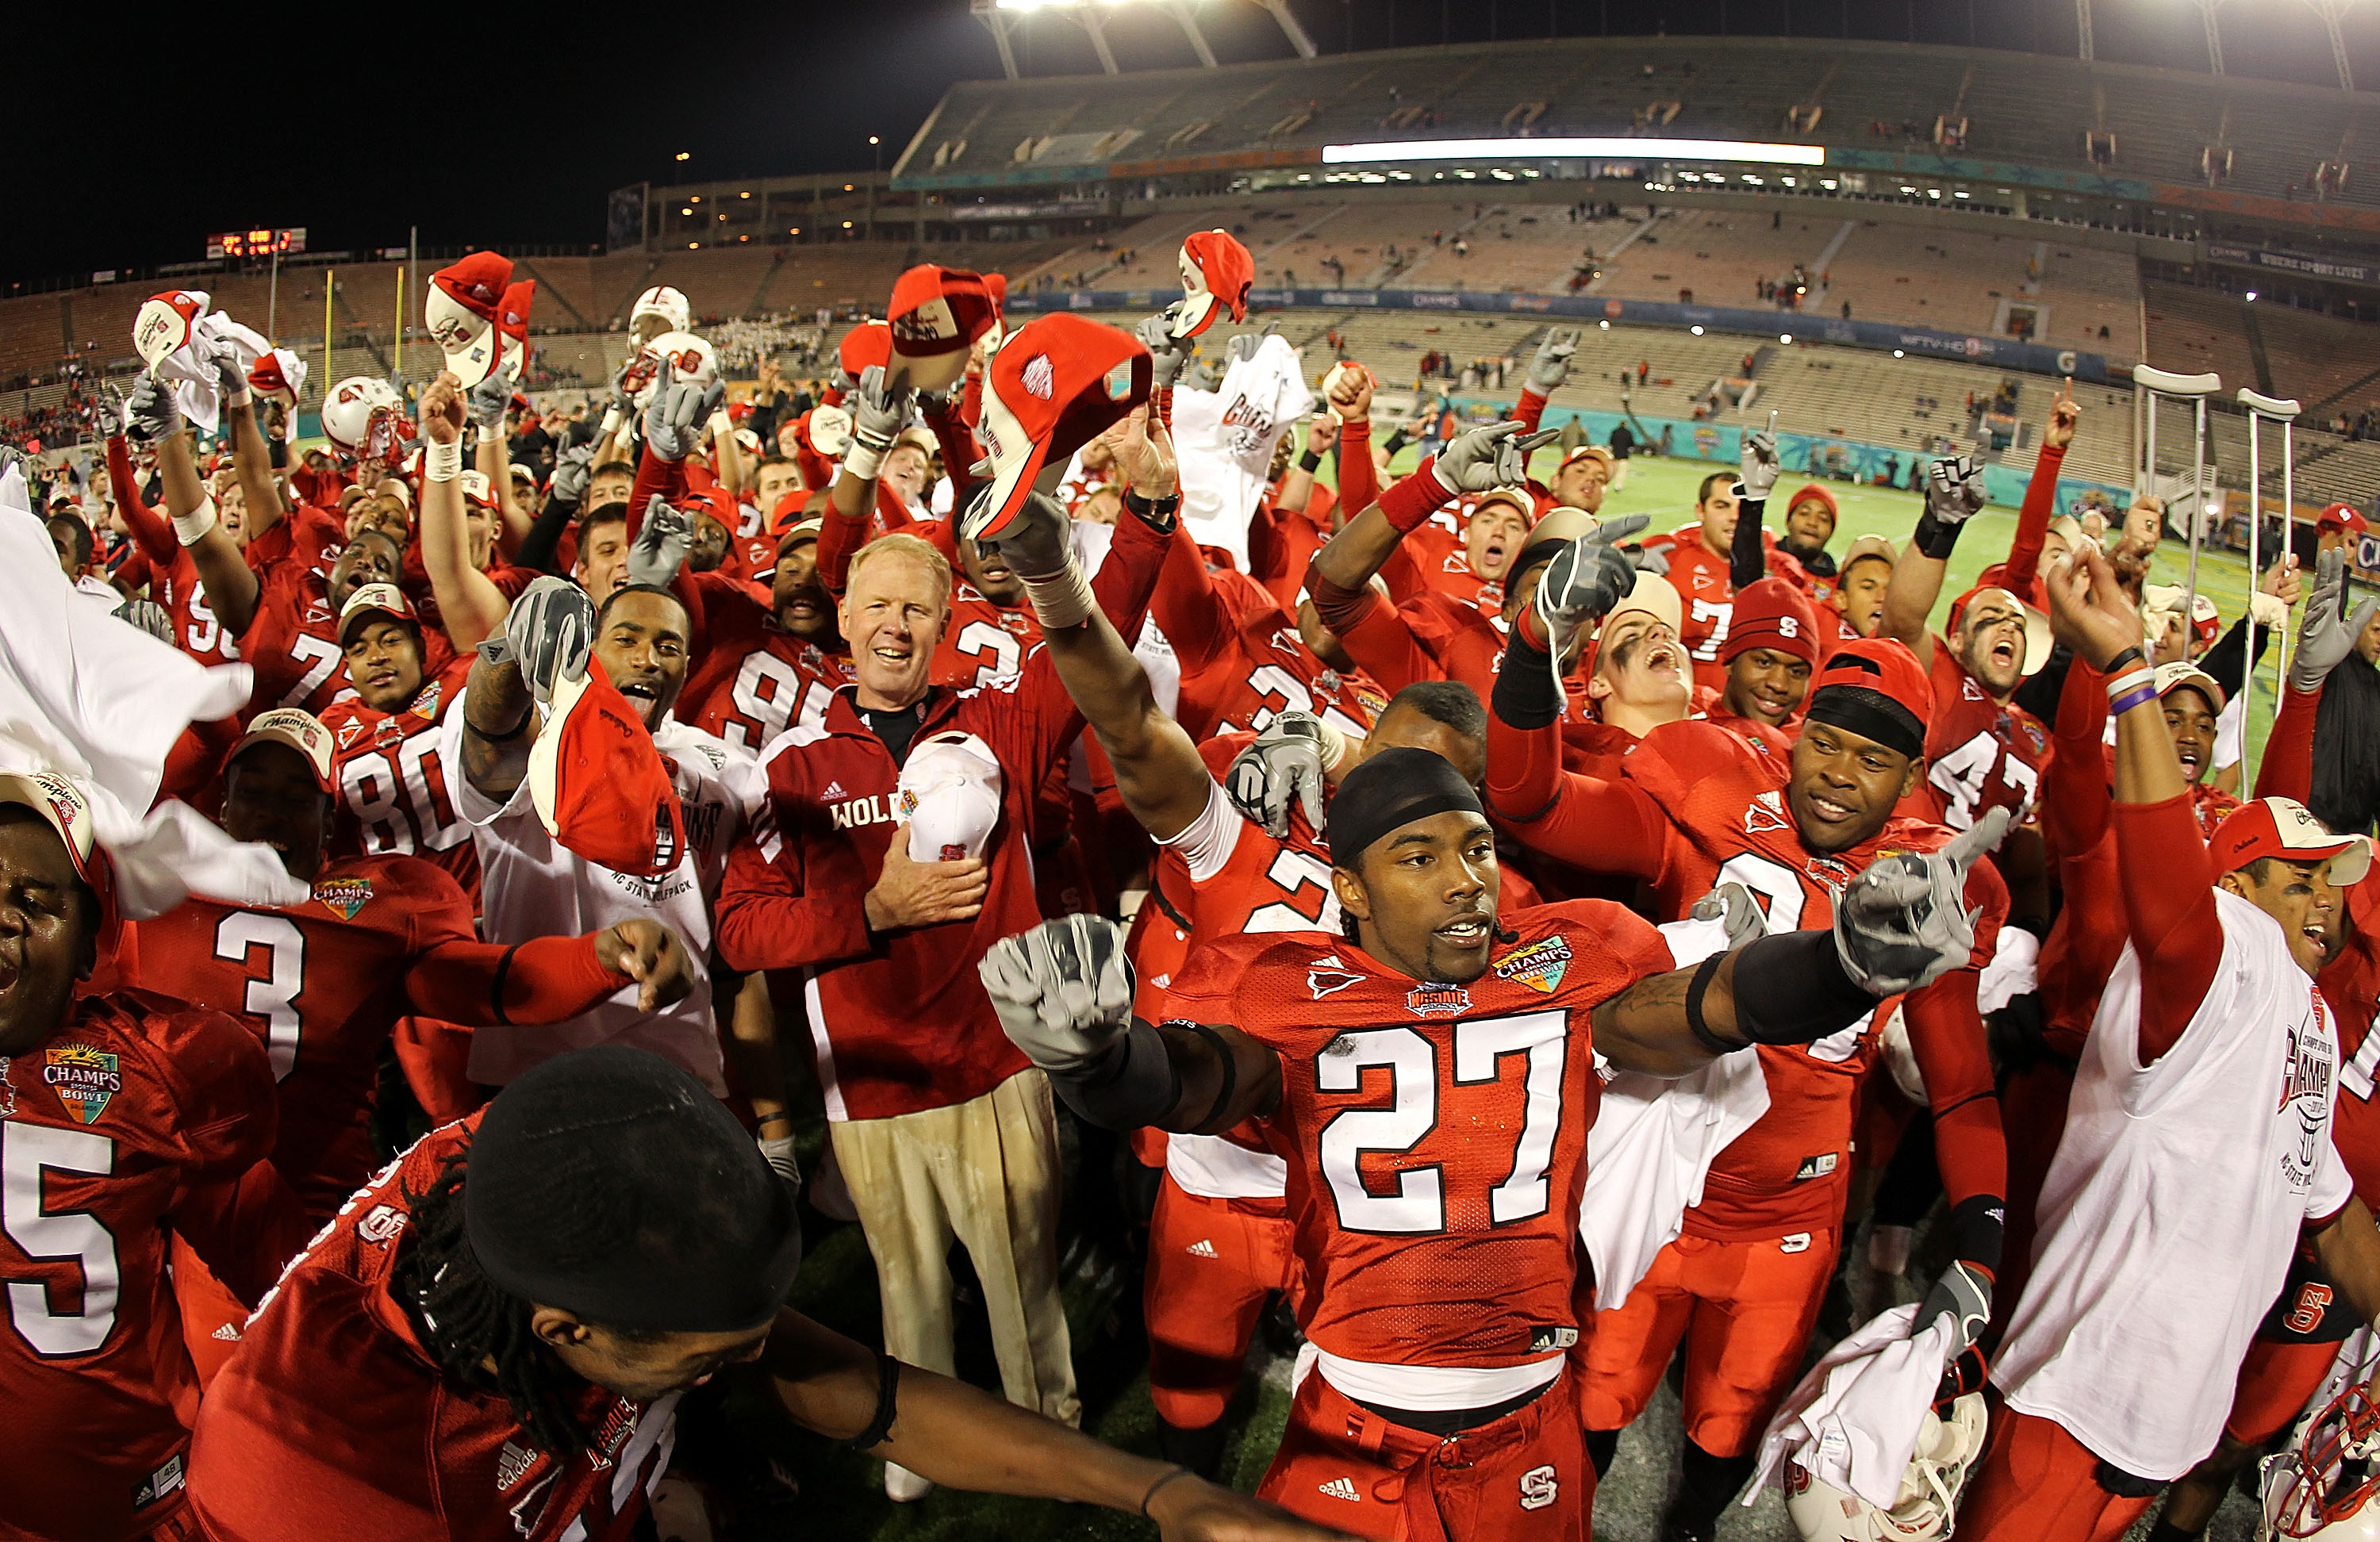 ORLANDO, FL - DECEMBER 28:  North Carolina State Wolfpack head coach Tom O'Brien celebrates after winning  the Champs Sports Bowl against the West Virginia Mountineers at Florida Citrus Bowl Stadium on December 28, 2010 in Orlando, Florida.  (Photo by Mik